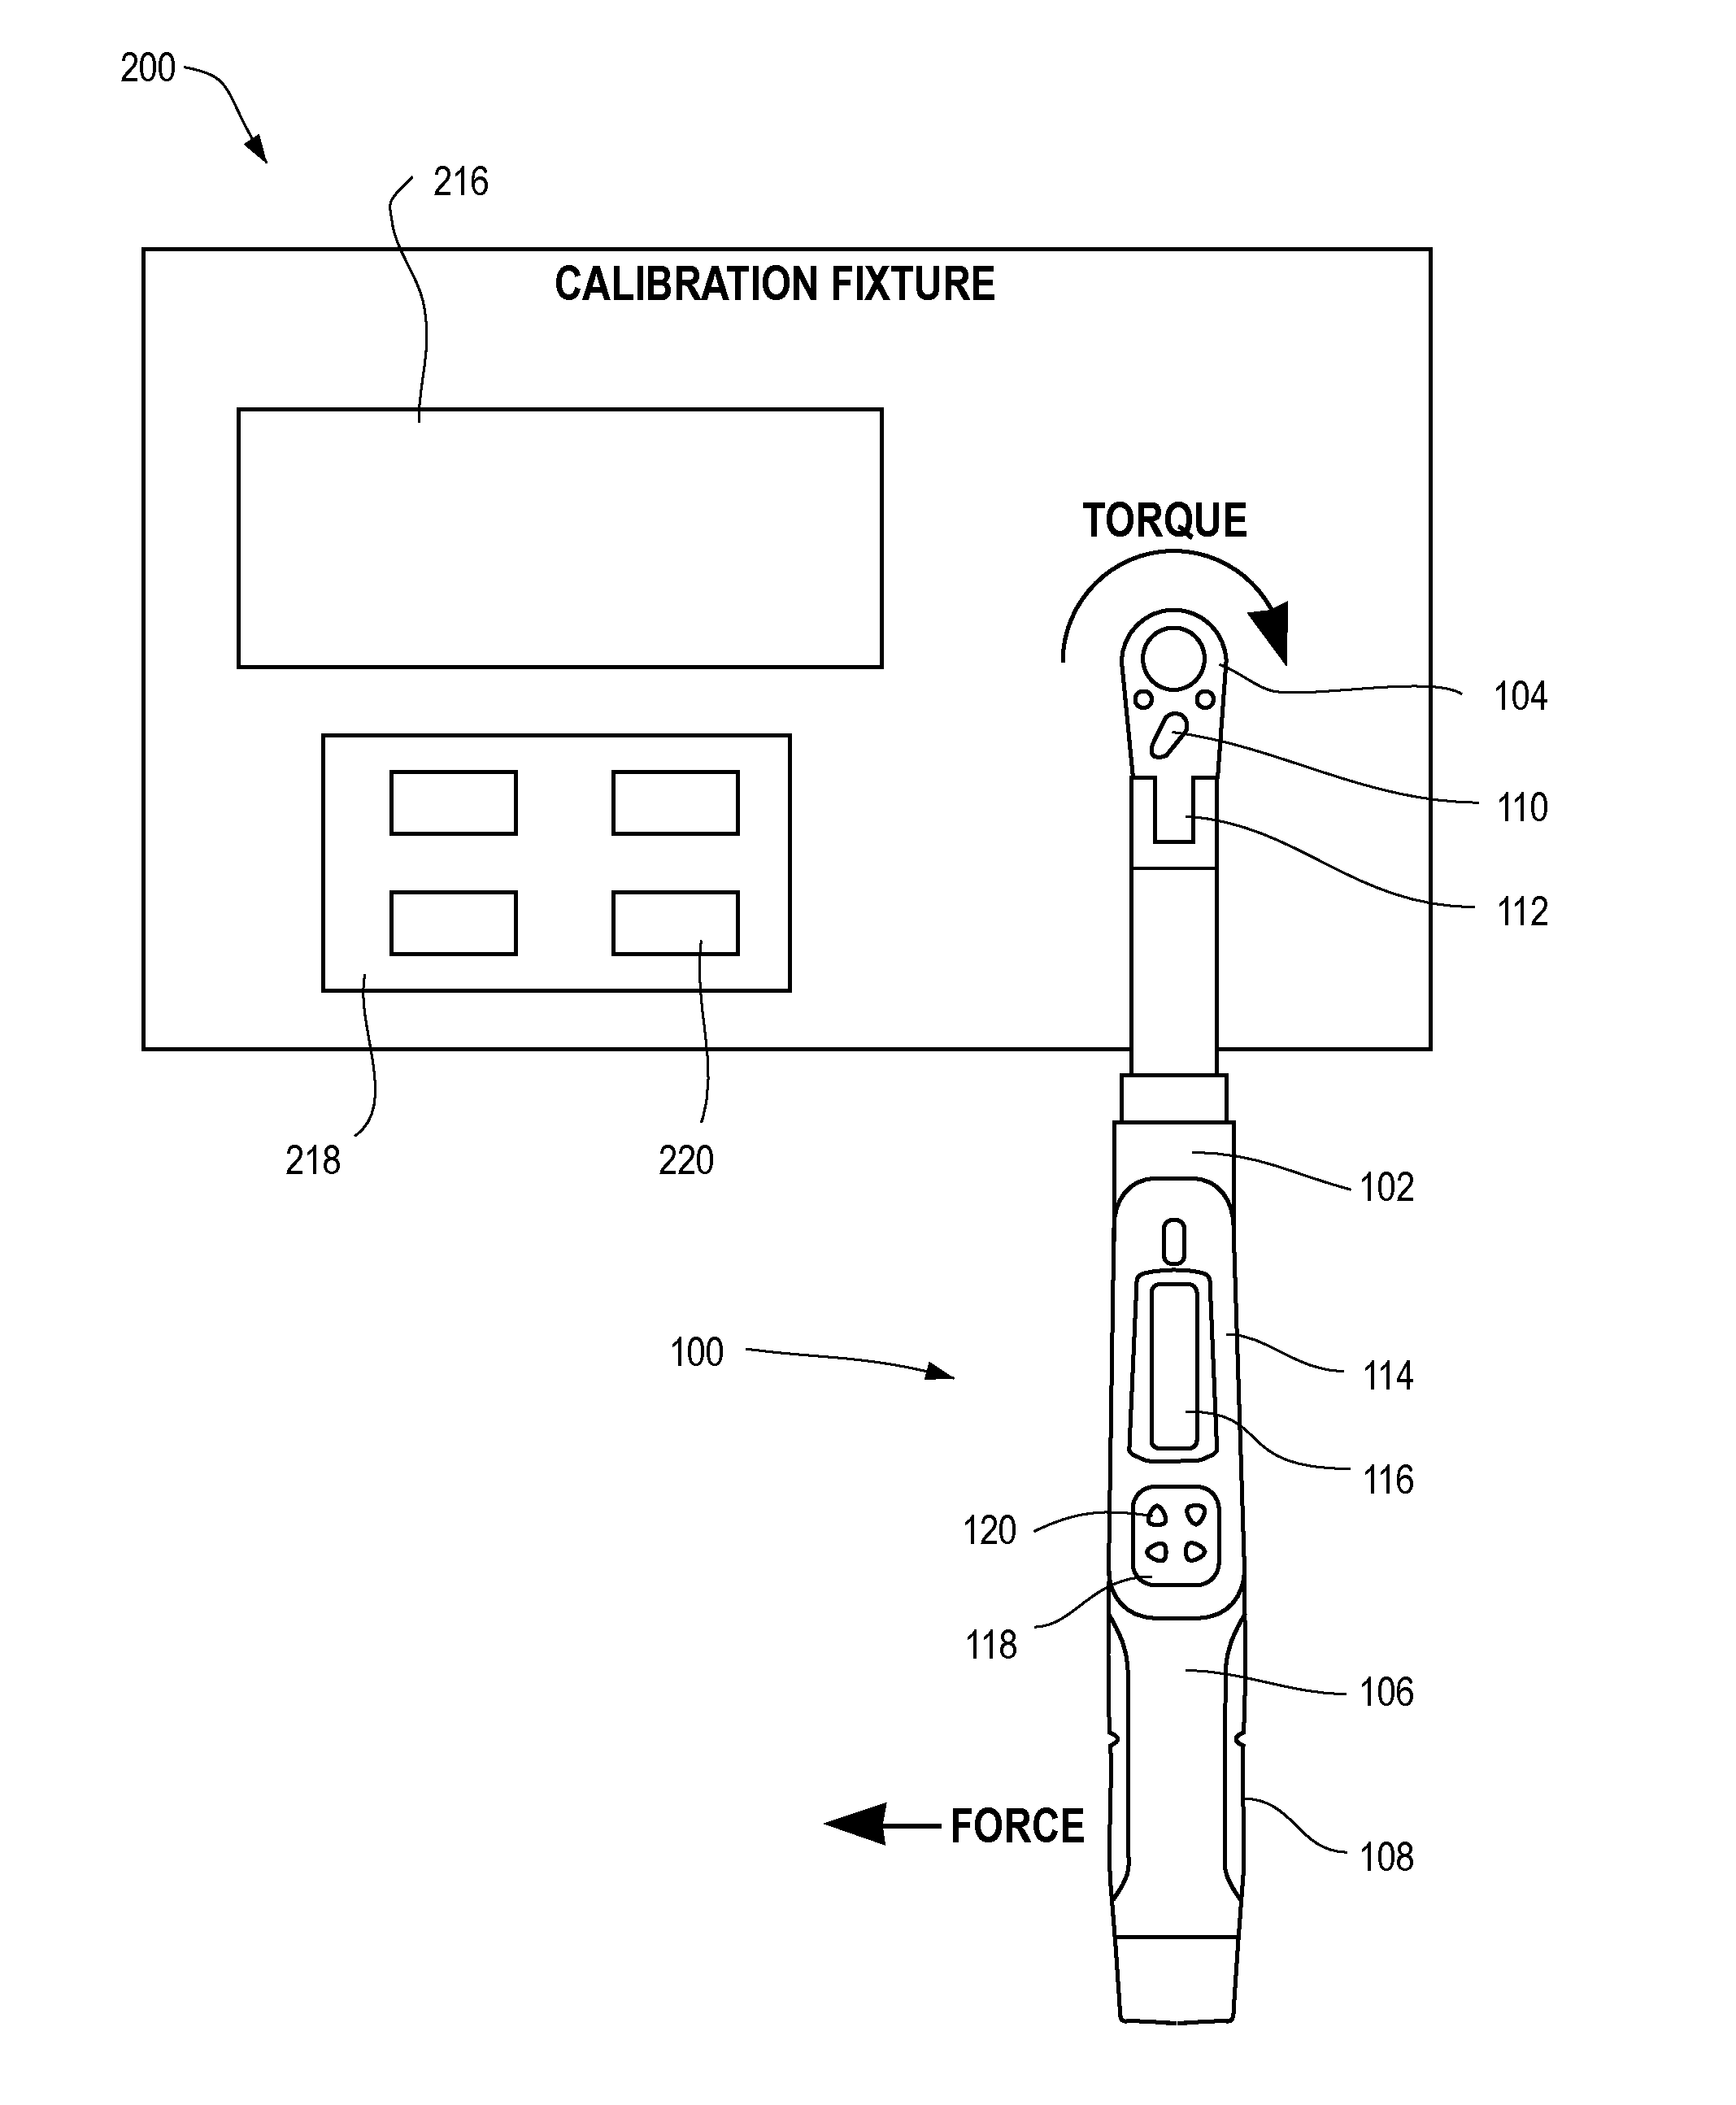 Method of calibrating torque using peak hold measurement on an electronic torque wrench